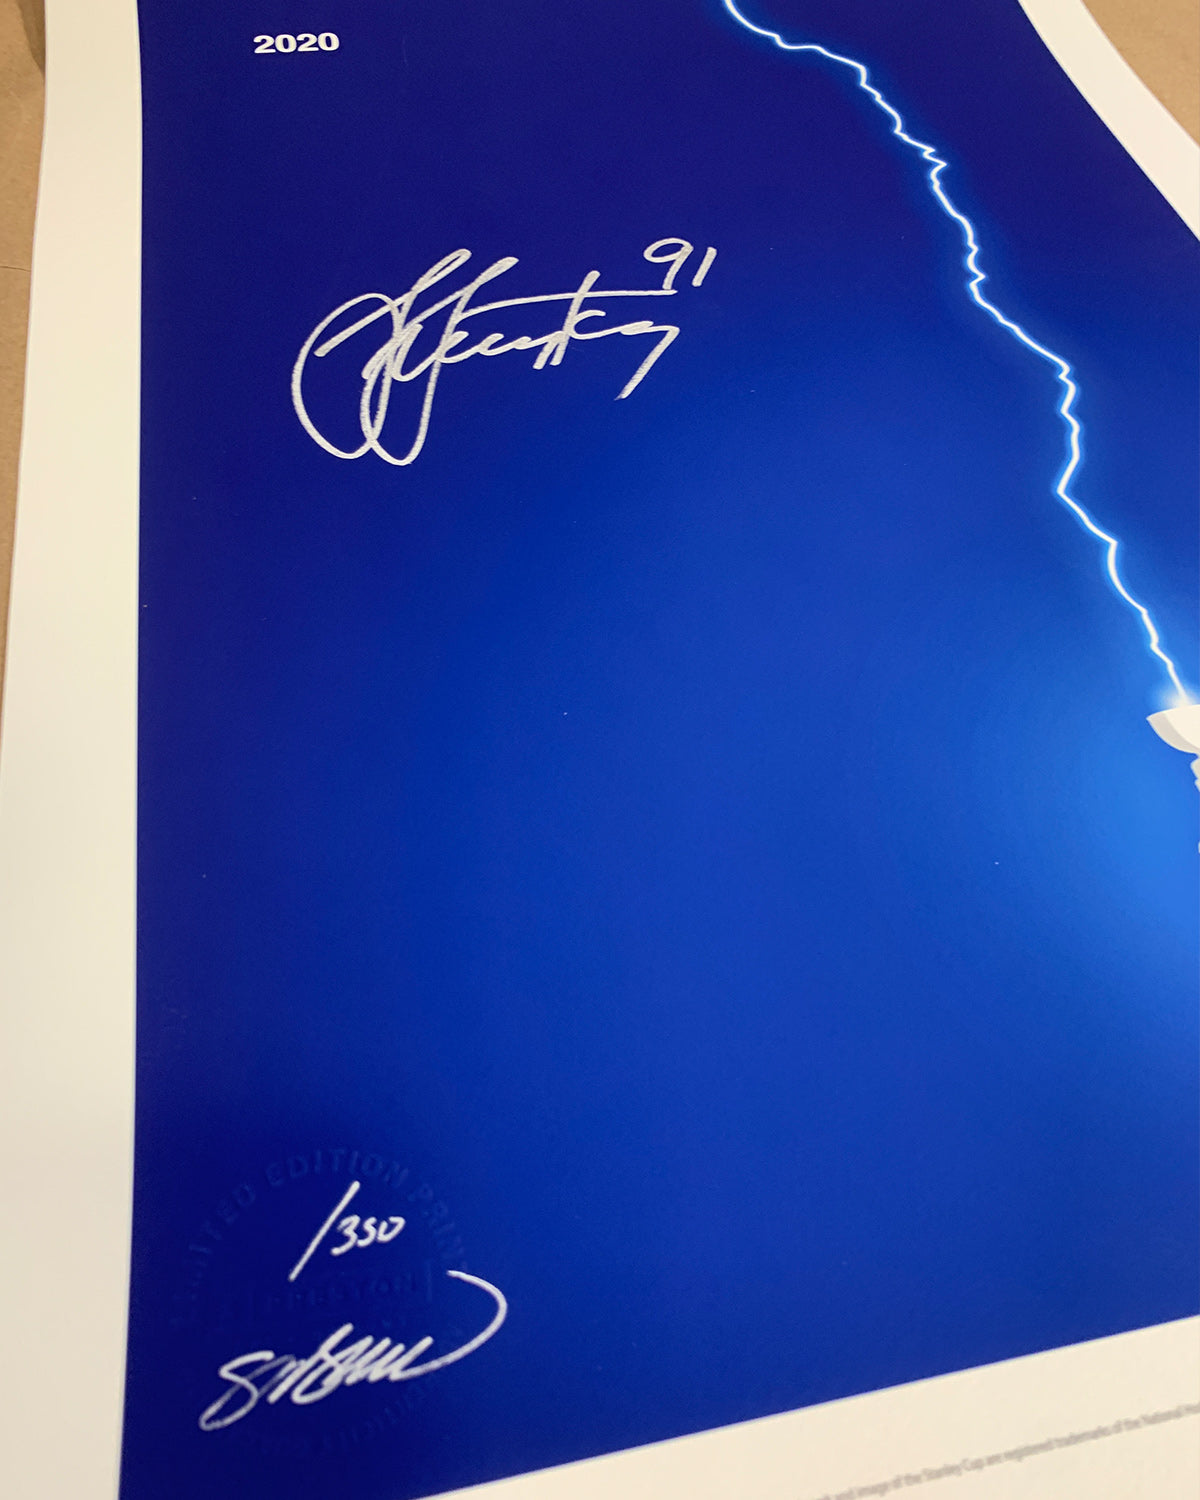 Minimalist Stanley Cup 2020 - Steven Stamkos Signed - Authenticated